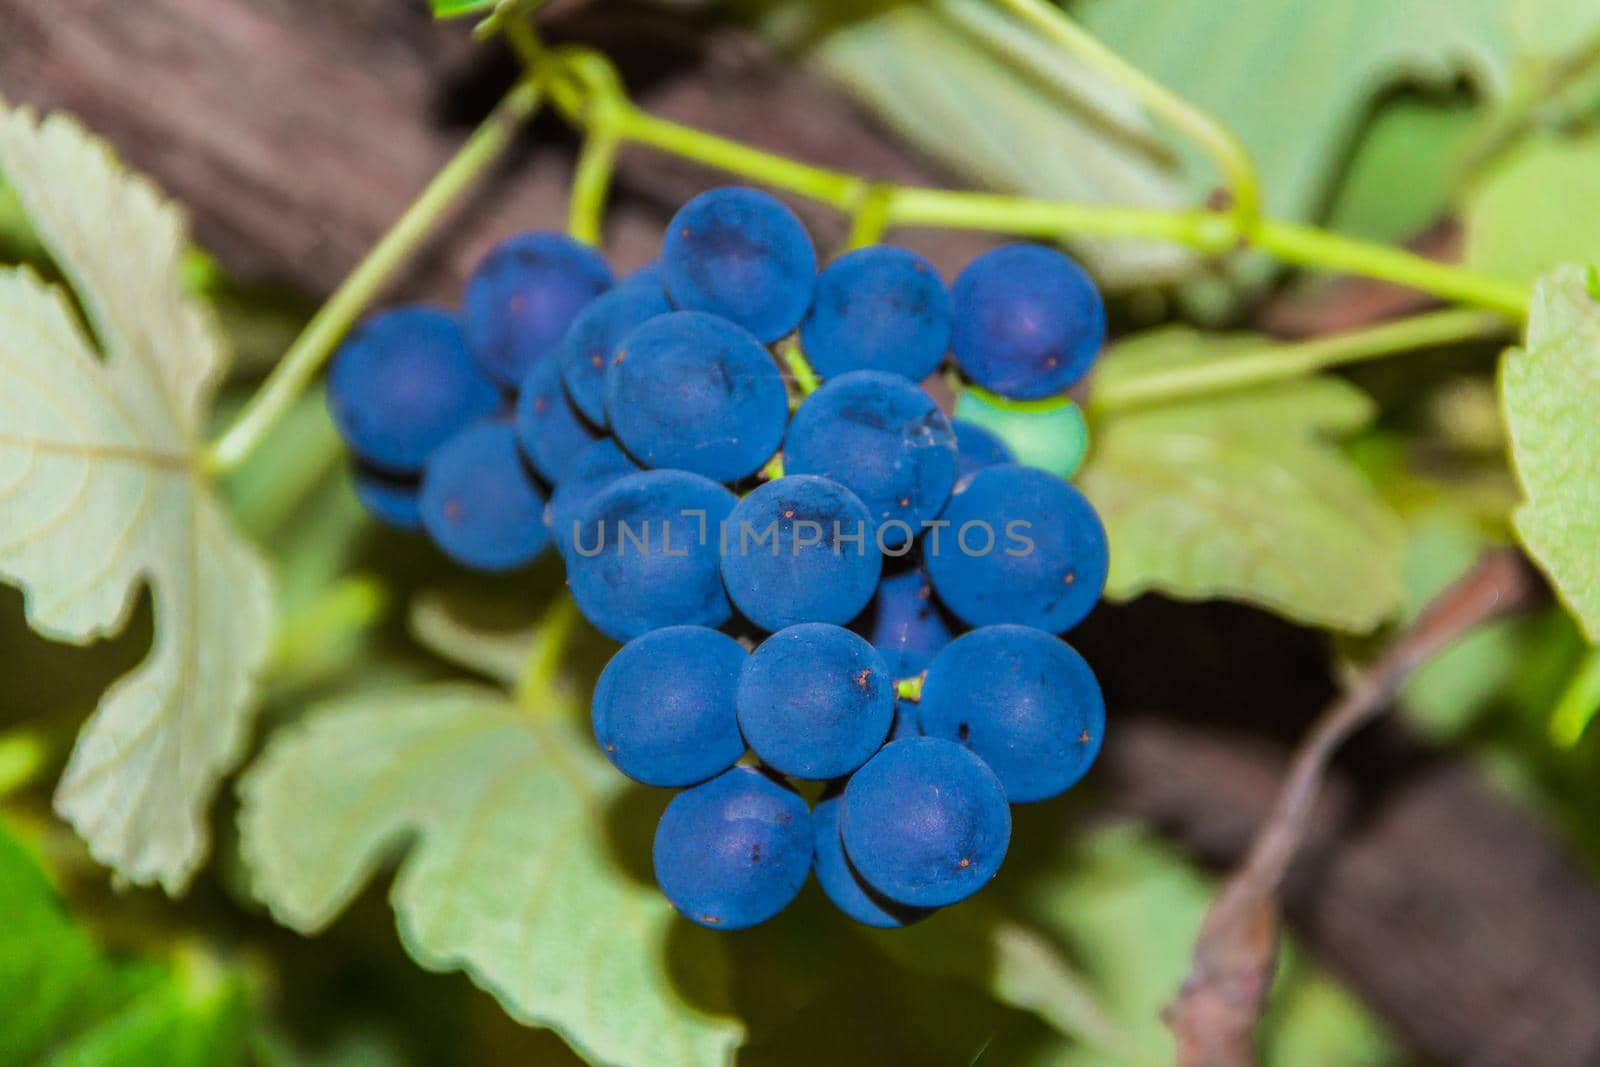 detail of a bunch of blue grapes of the Vitis labrusca variety in the orchard by GabrielaBertolini